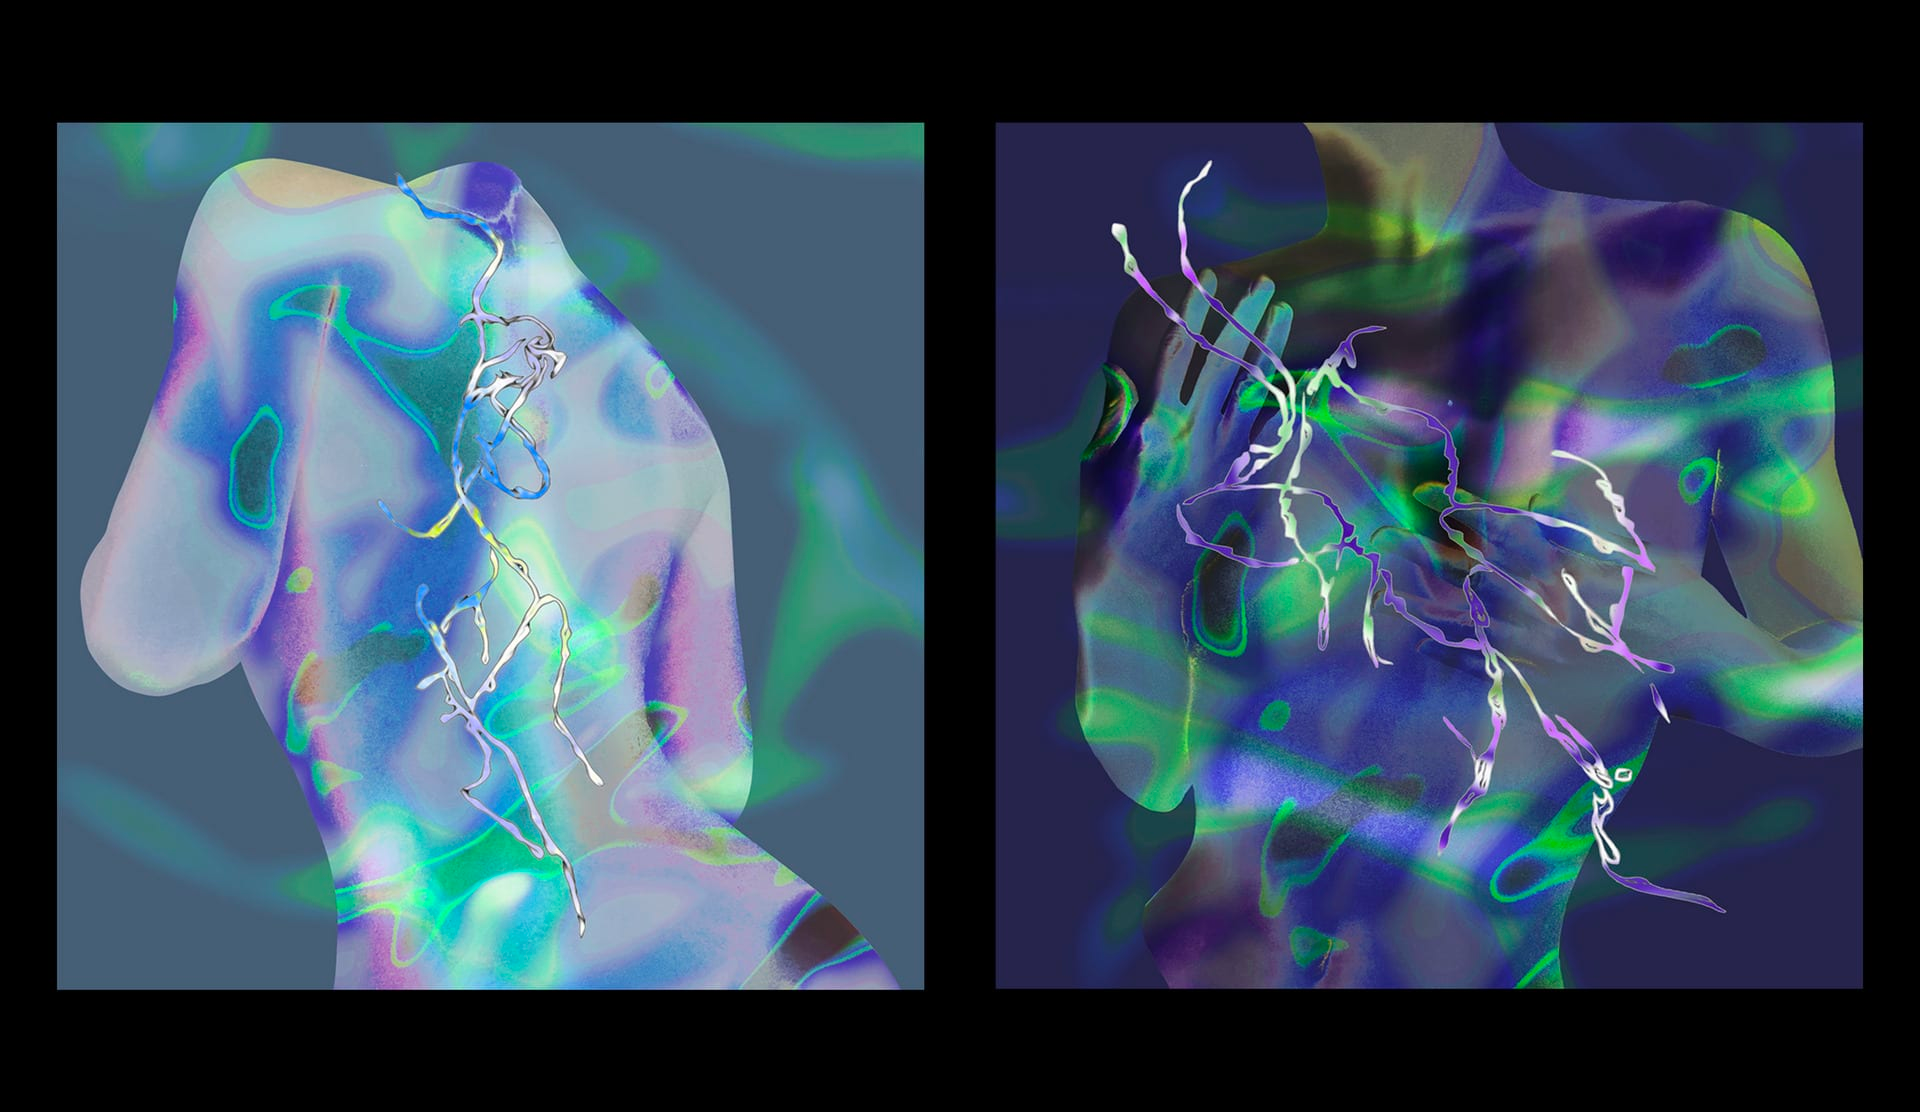 Two images side by side. On the left an angled human back from the neck to waist and on the right a human chest, with swirls and shapes in glowing greens and blues over both.